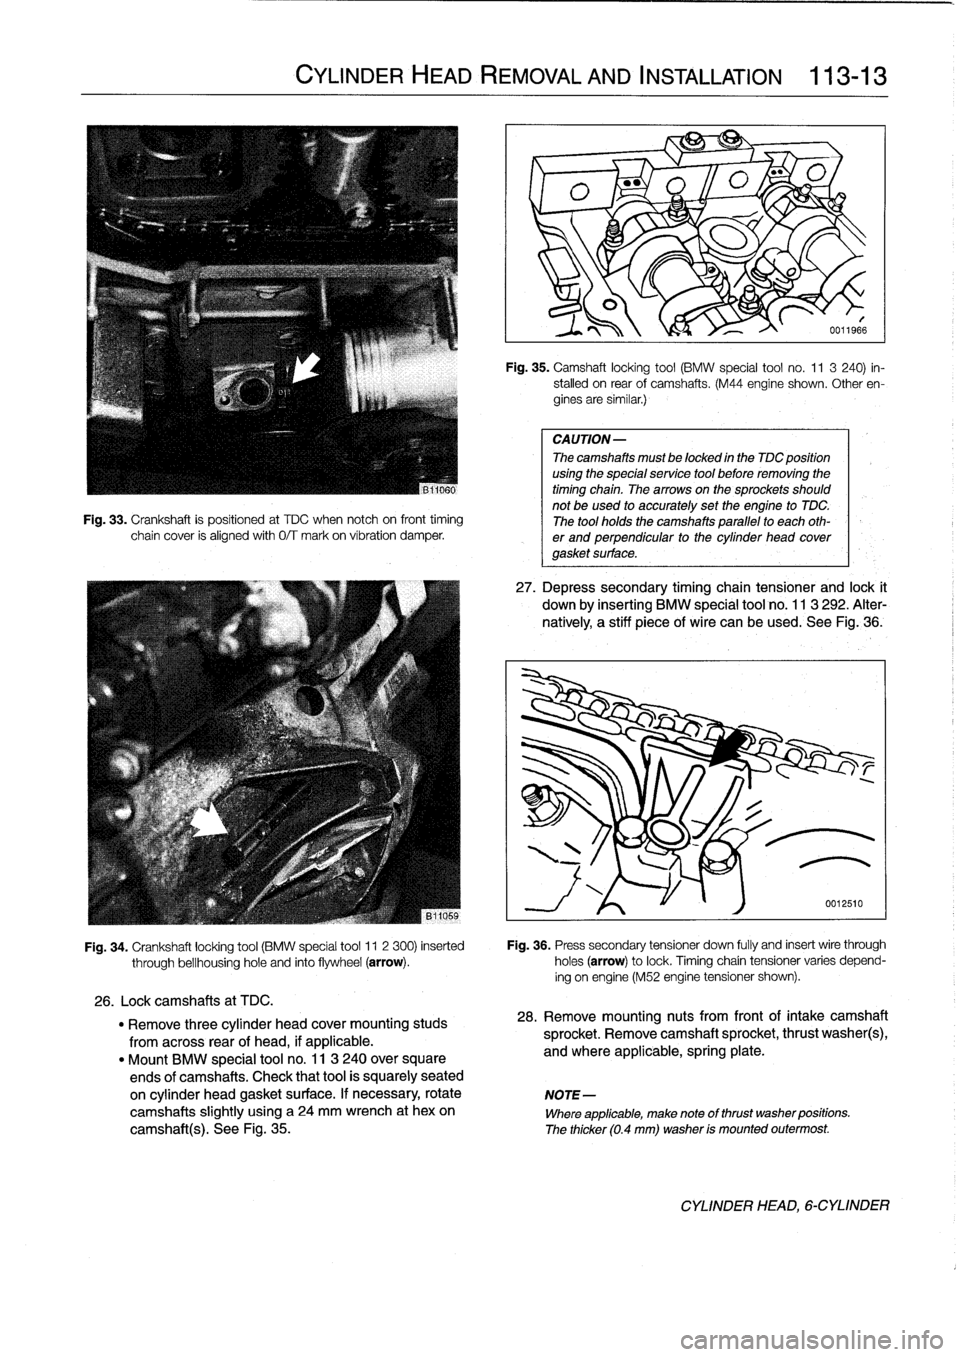 BMW 323i 1997 E36 Repair Manual 
Fig
.
33
.
Crankshaft
is
positioned
at
TDC
when
notch
oh
front
timing
chain
cover
is
alignedwith
0/T
mark
on
víbration
damper
.

CYLINDER
HEAD
REMOVAL
AND
INSTALLATION

	

113-
1
3

Fig
.
35
.
Camsh